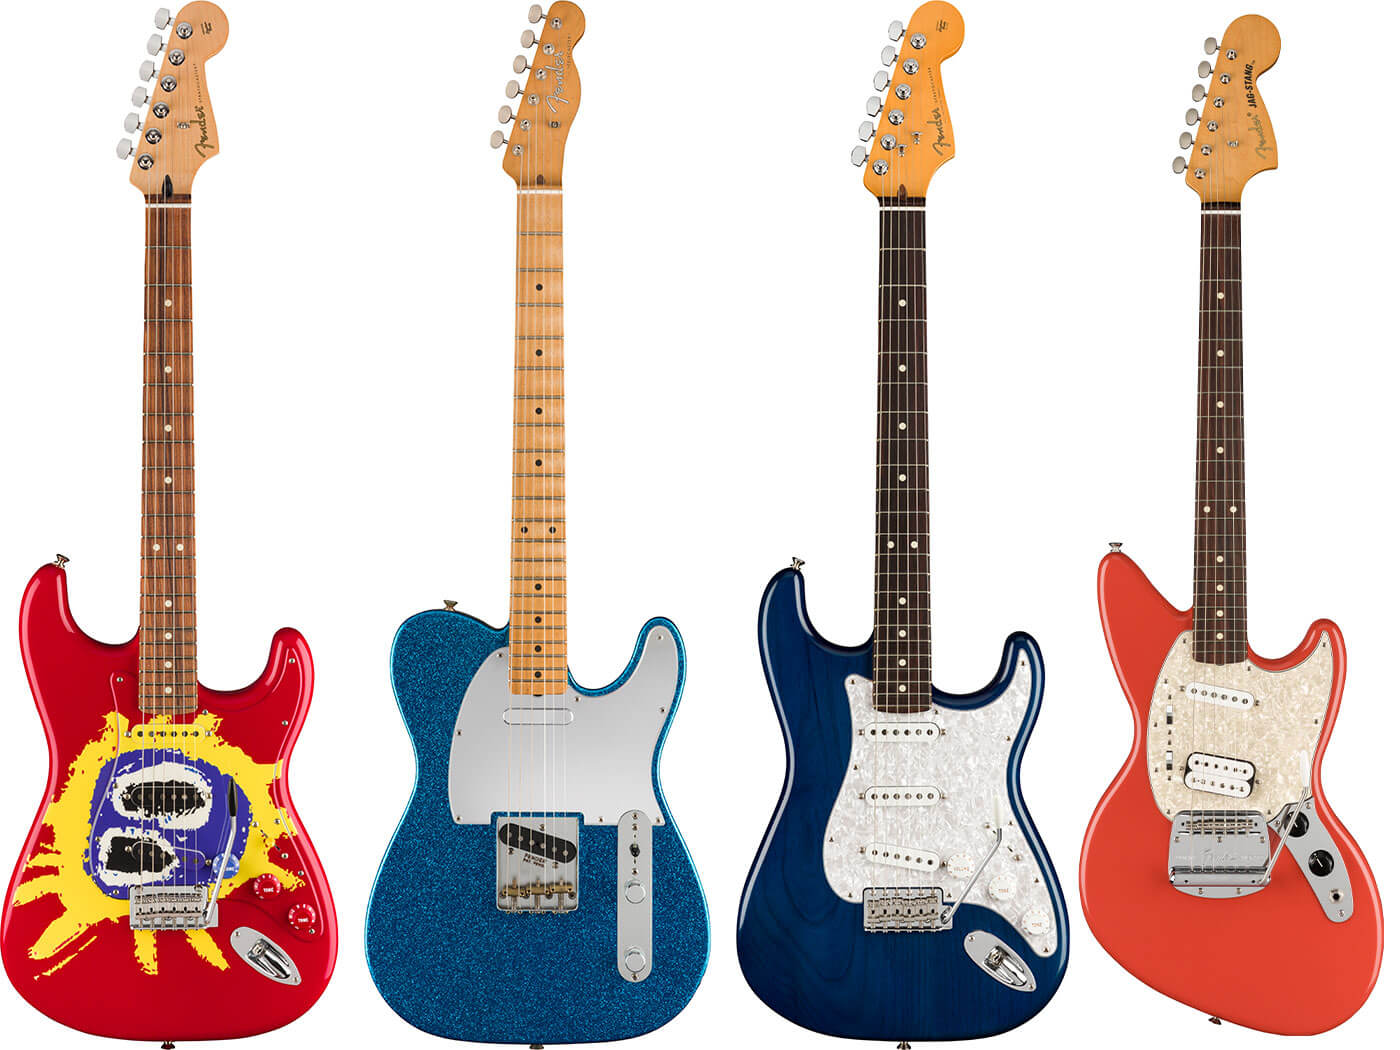 New Fender Signatures for 2021